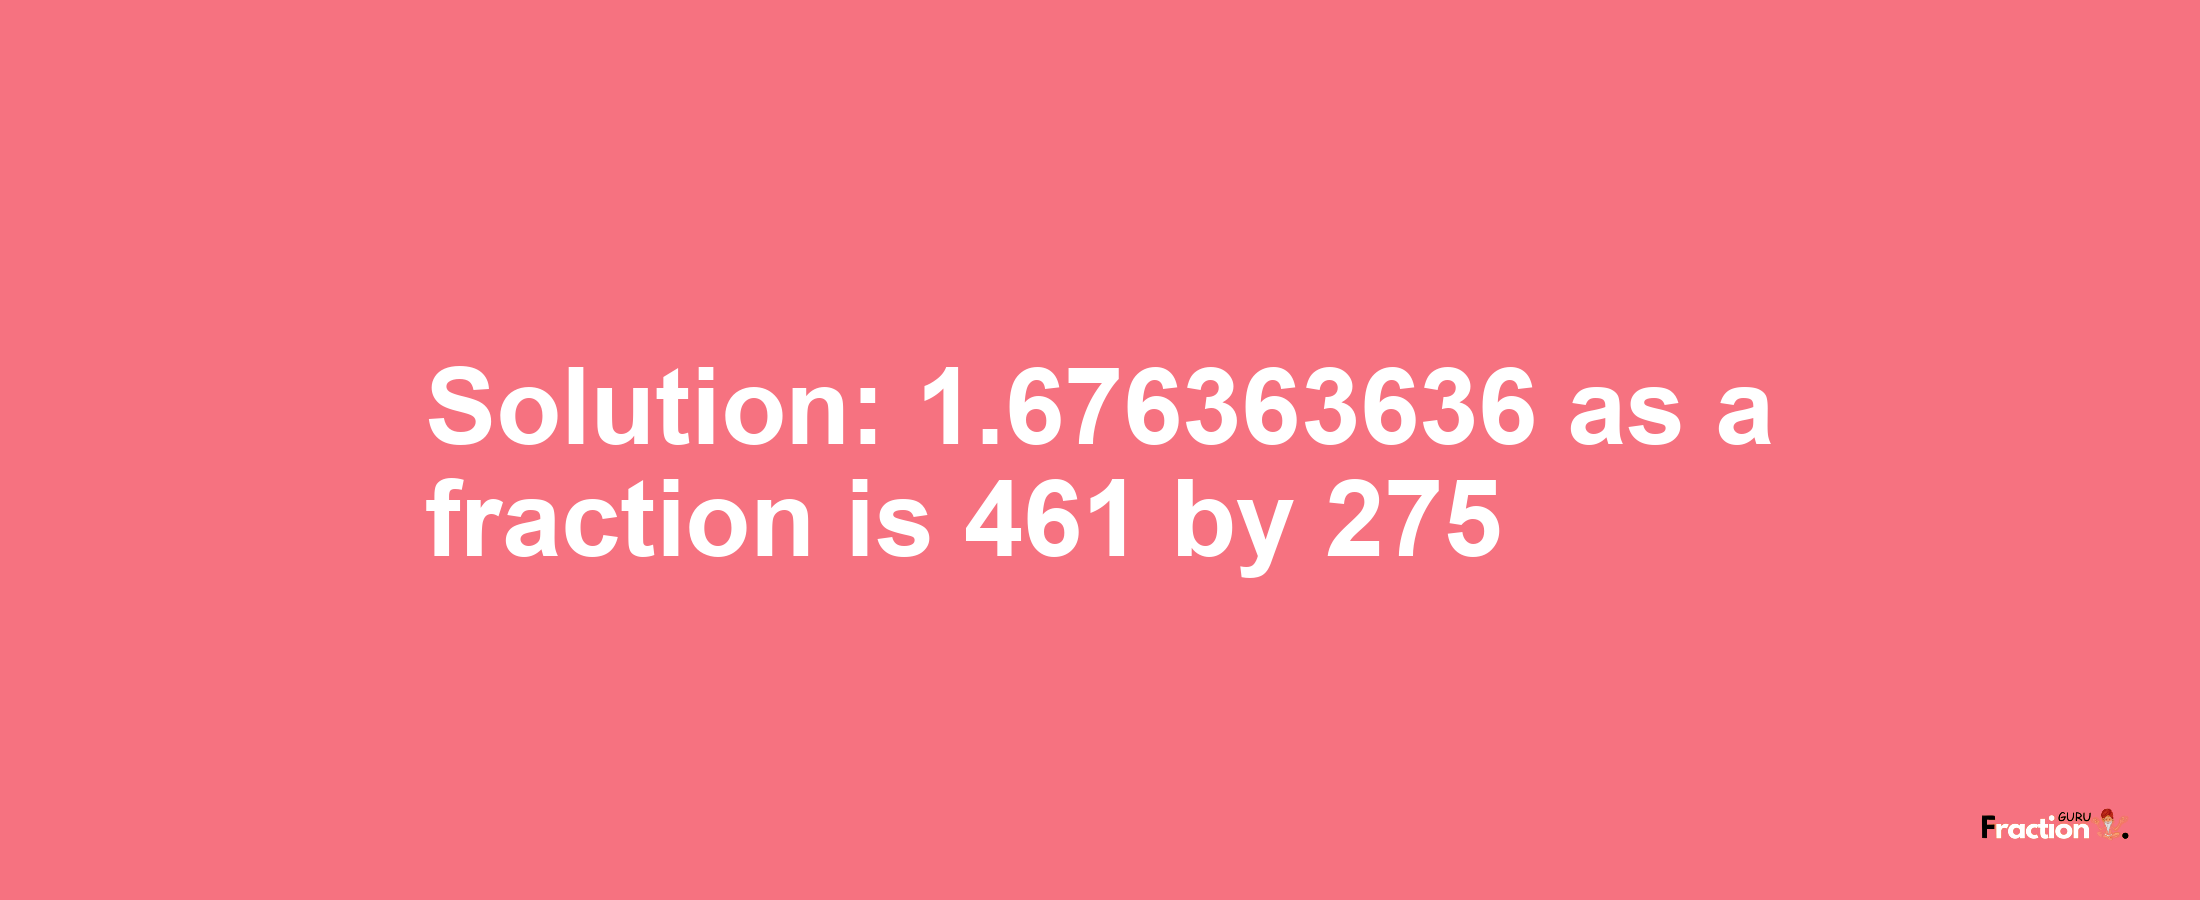 Solution:1.676363636 as a fraction is 461/275